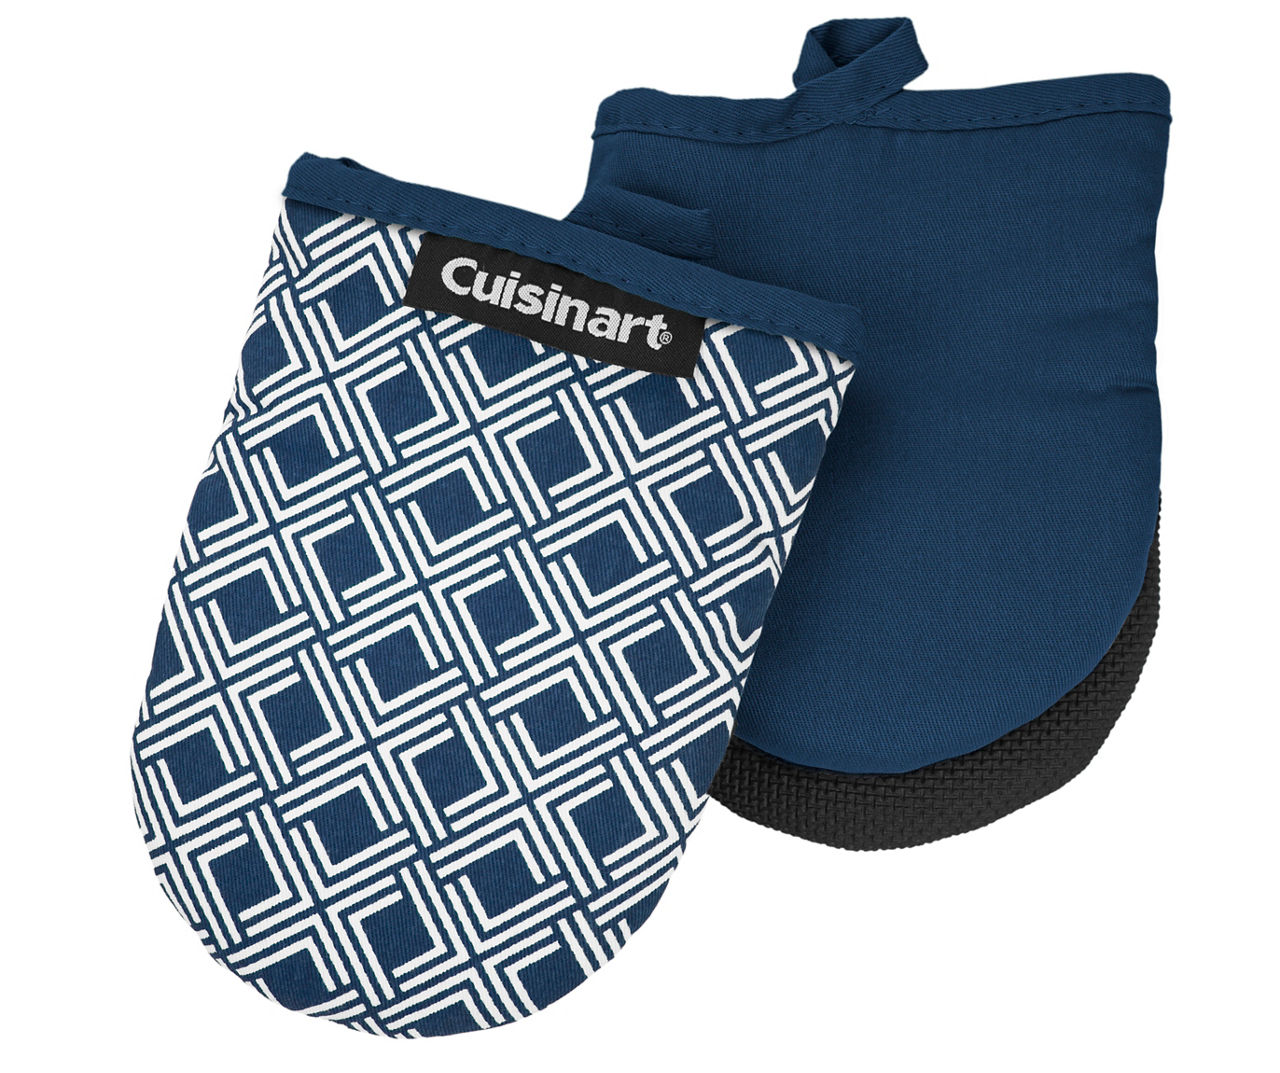 CUISINART MINI OVEN MITTS (2) TURQUOISE QUILTED 100% COTTON NEOPRENE NWT